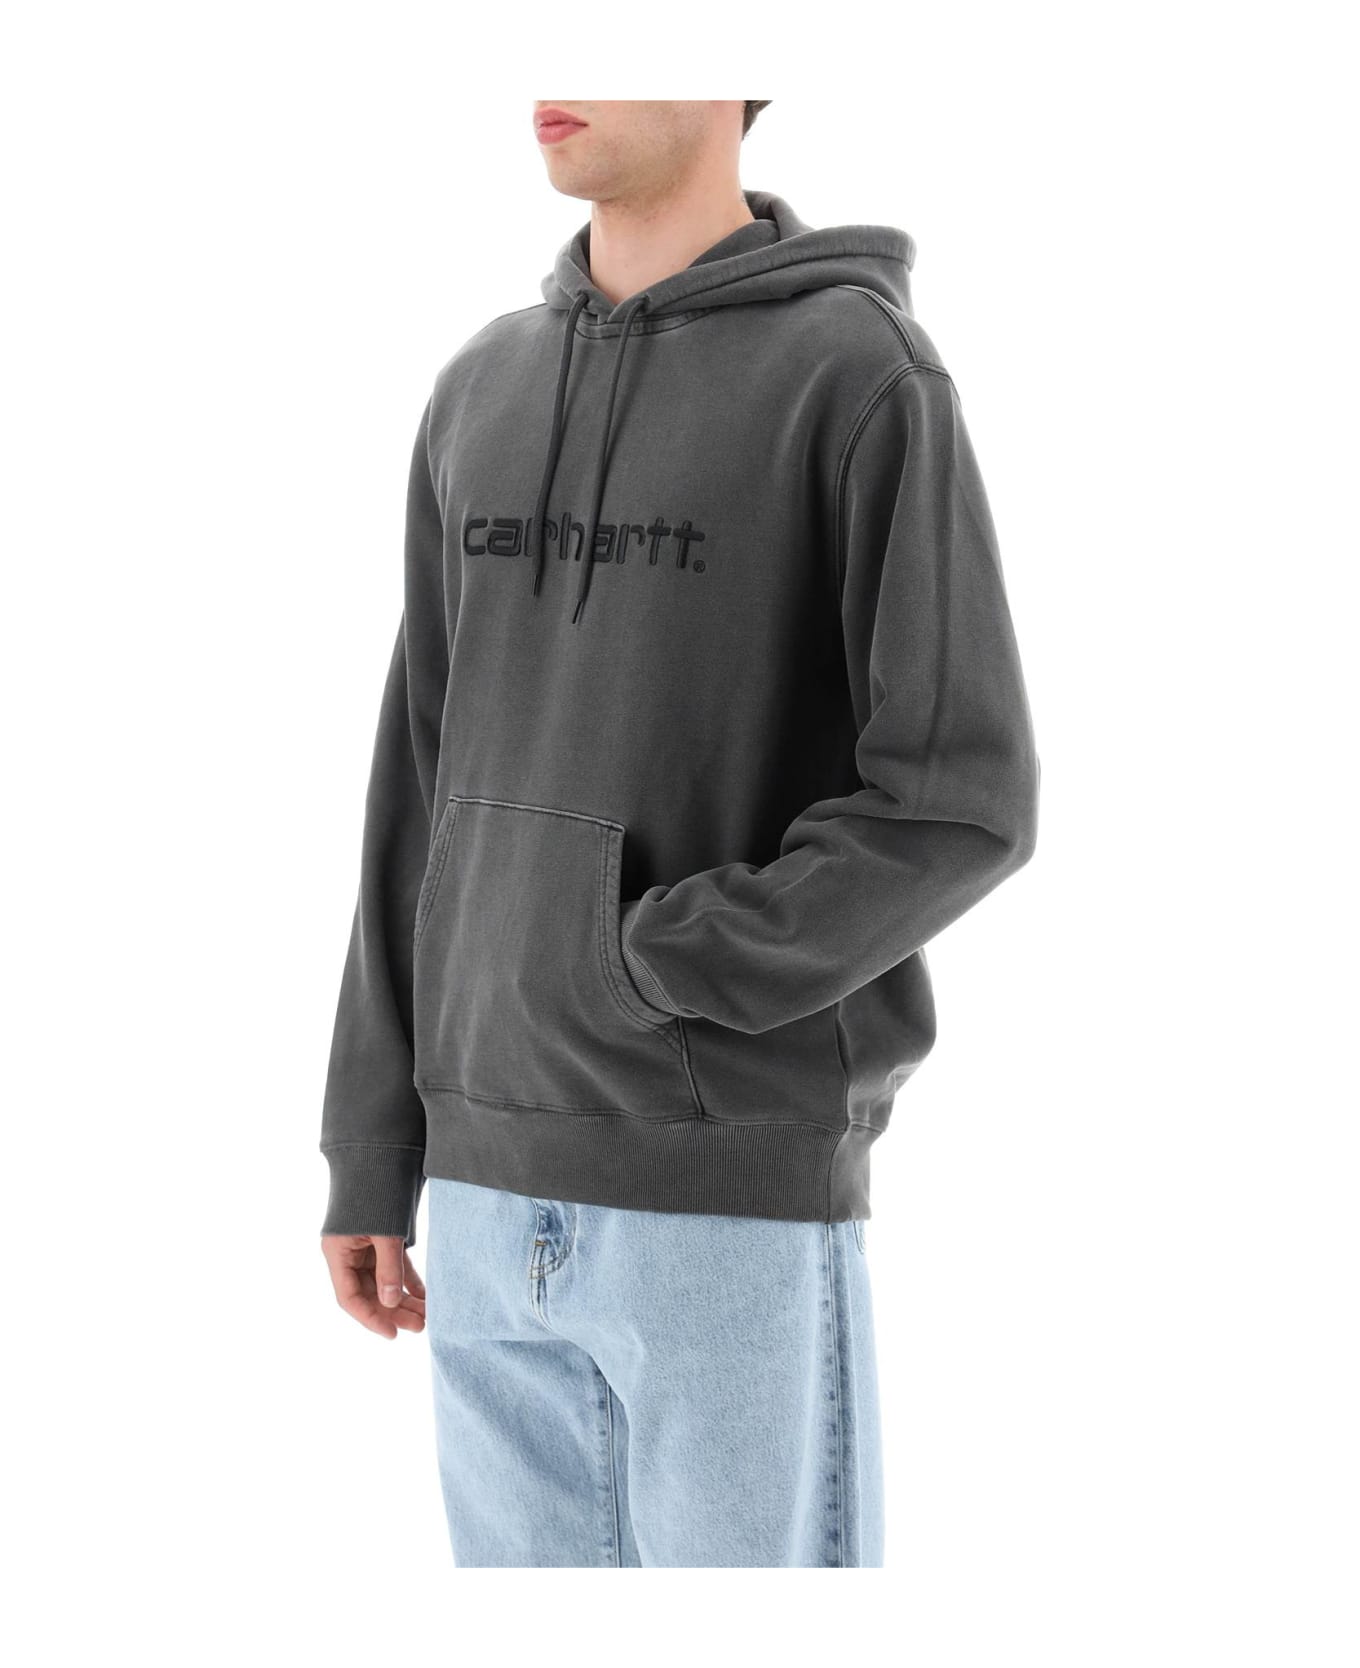 Carhartt Hoodie With Logo Embroidery - GREY